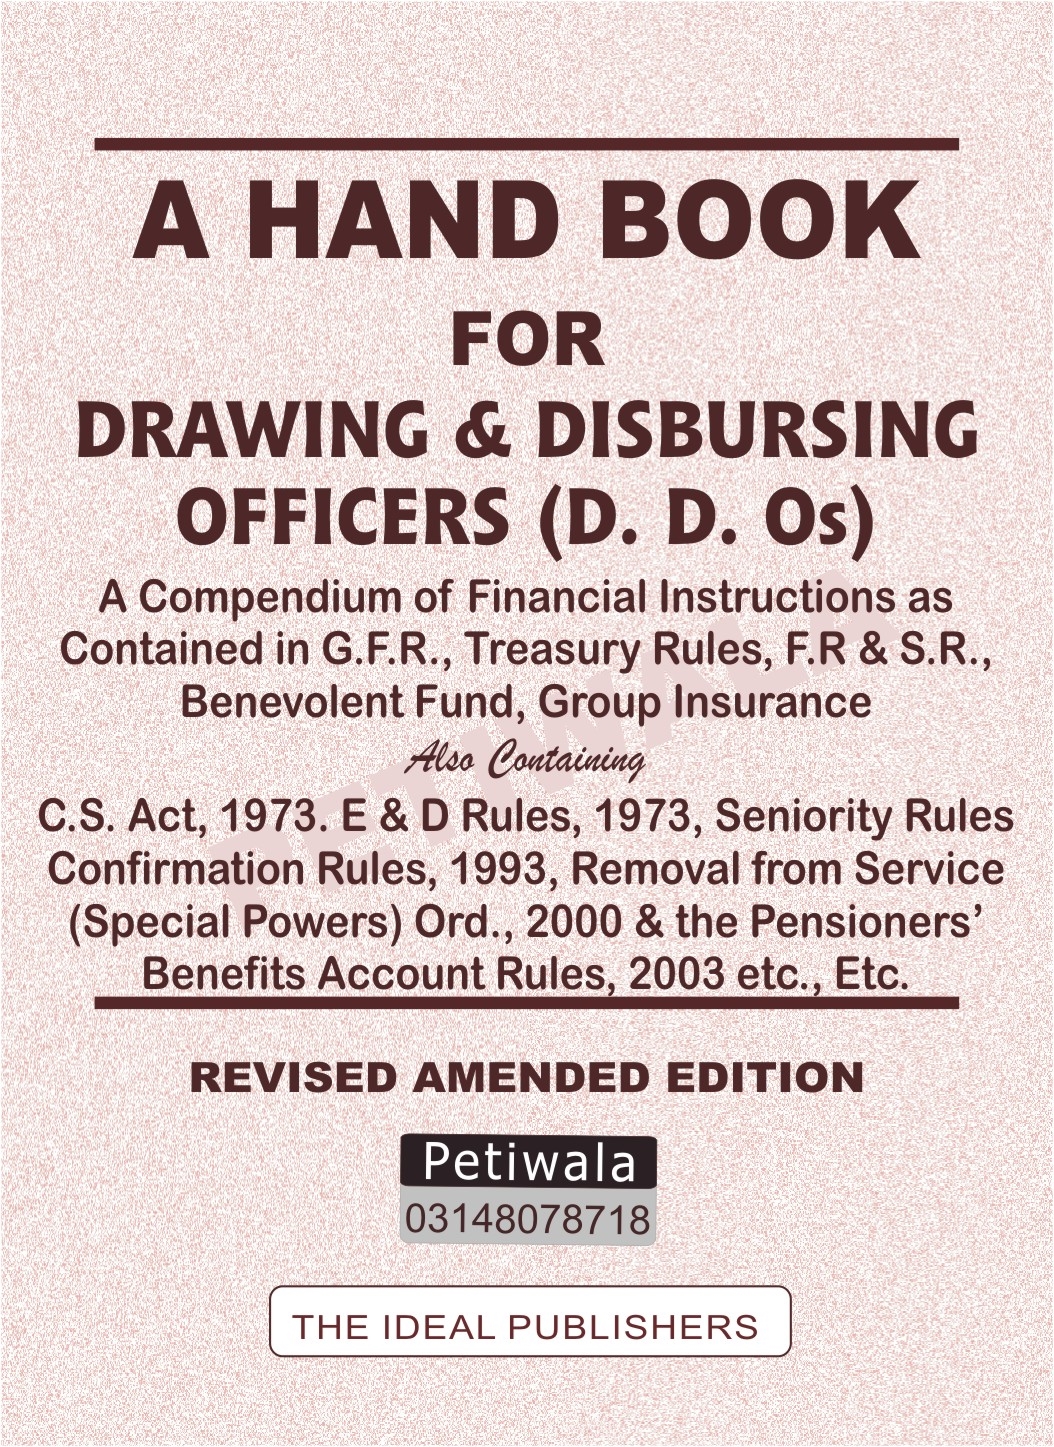 Picture of Hand Book for D.D.Os - A Hand Book for Drawing and Disbursing Officers